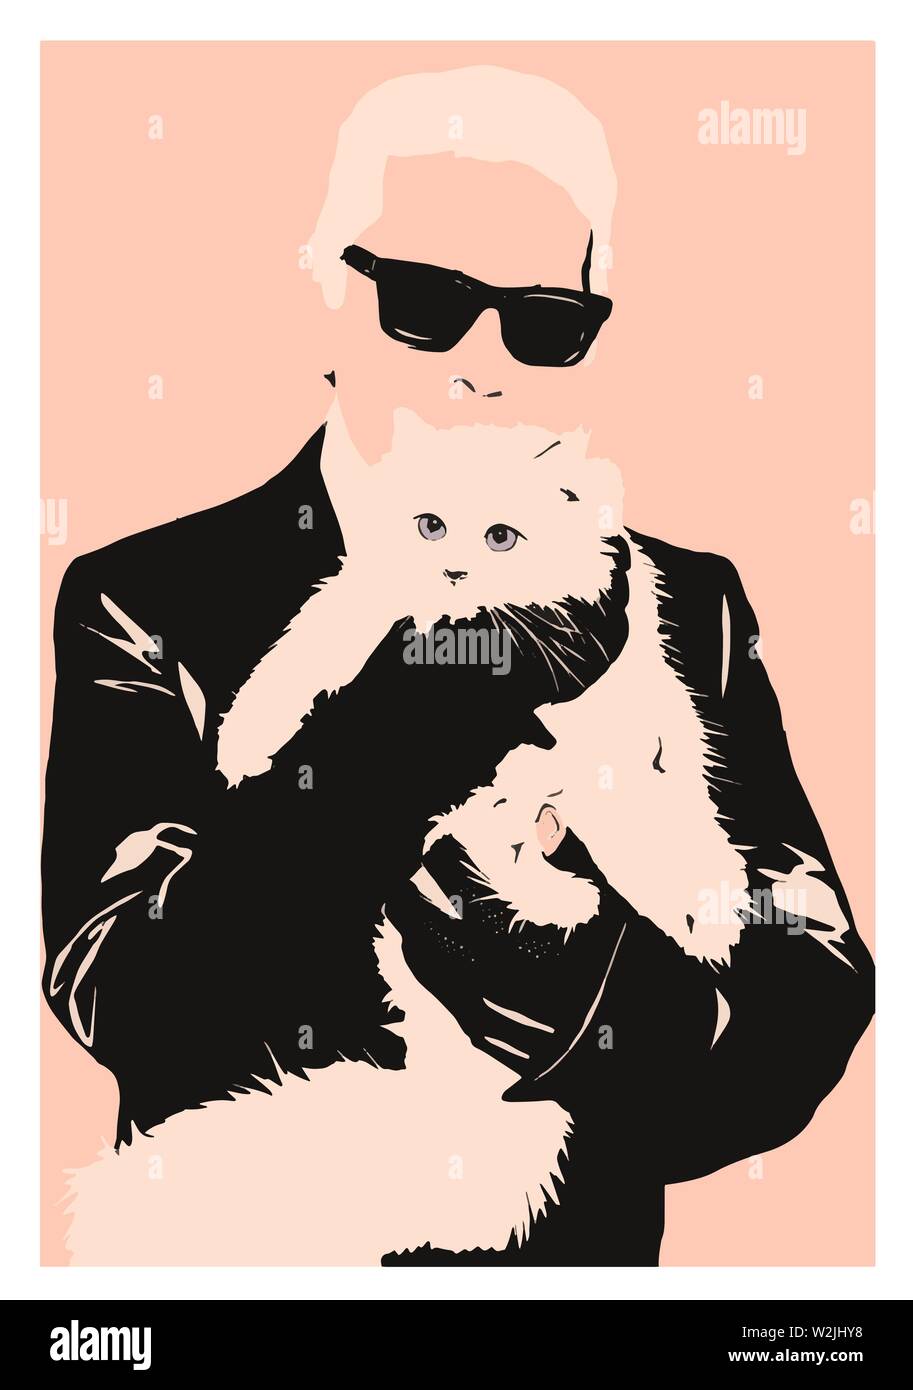 Karl lagerfeld cat choupette Stock Vector Images - Alamy